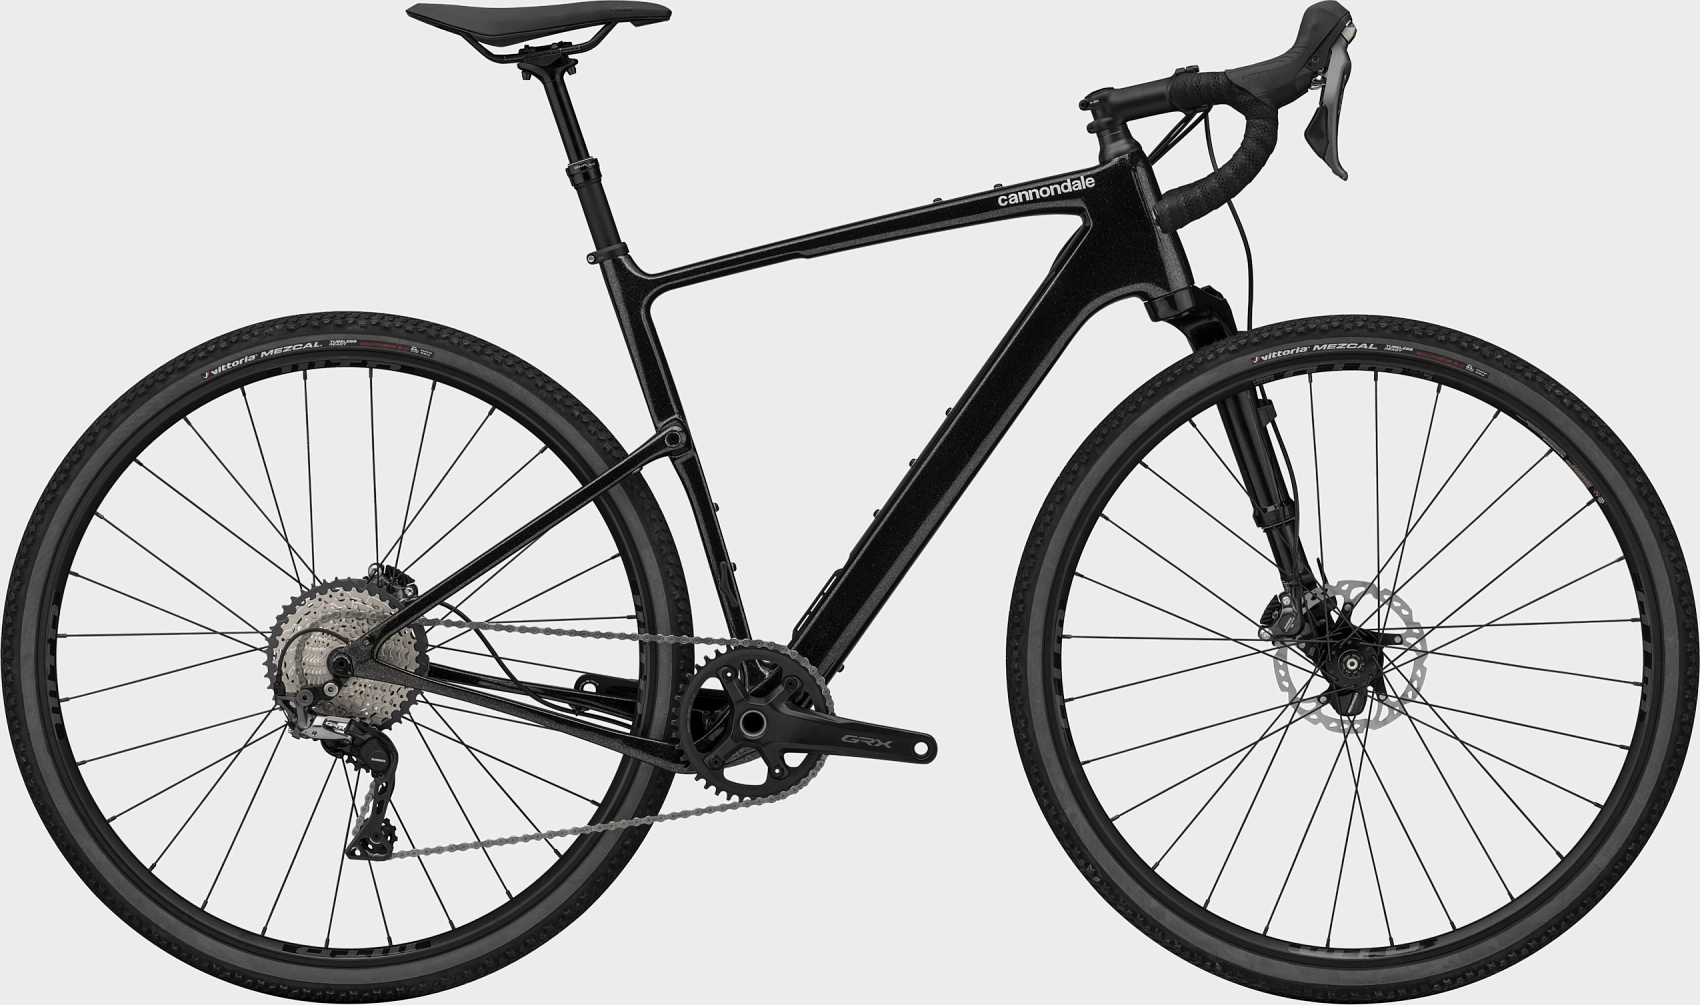 Cannondale Cannodale Topstone Carbon 2 Lefty